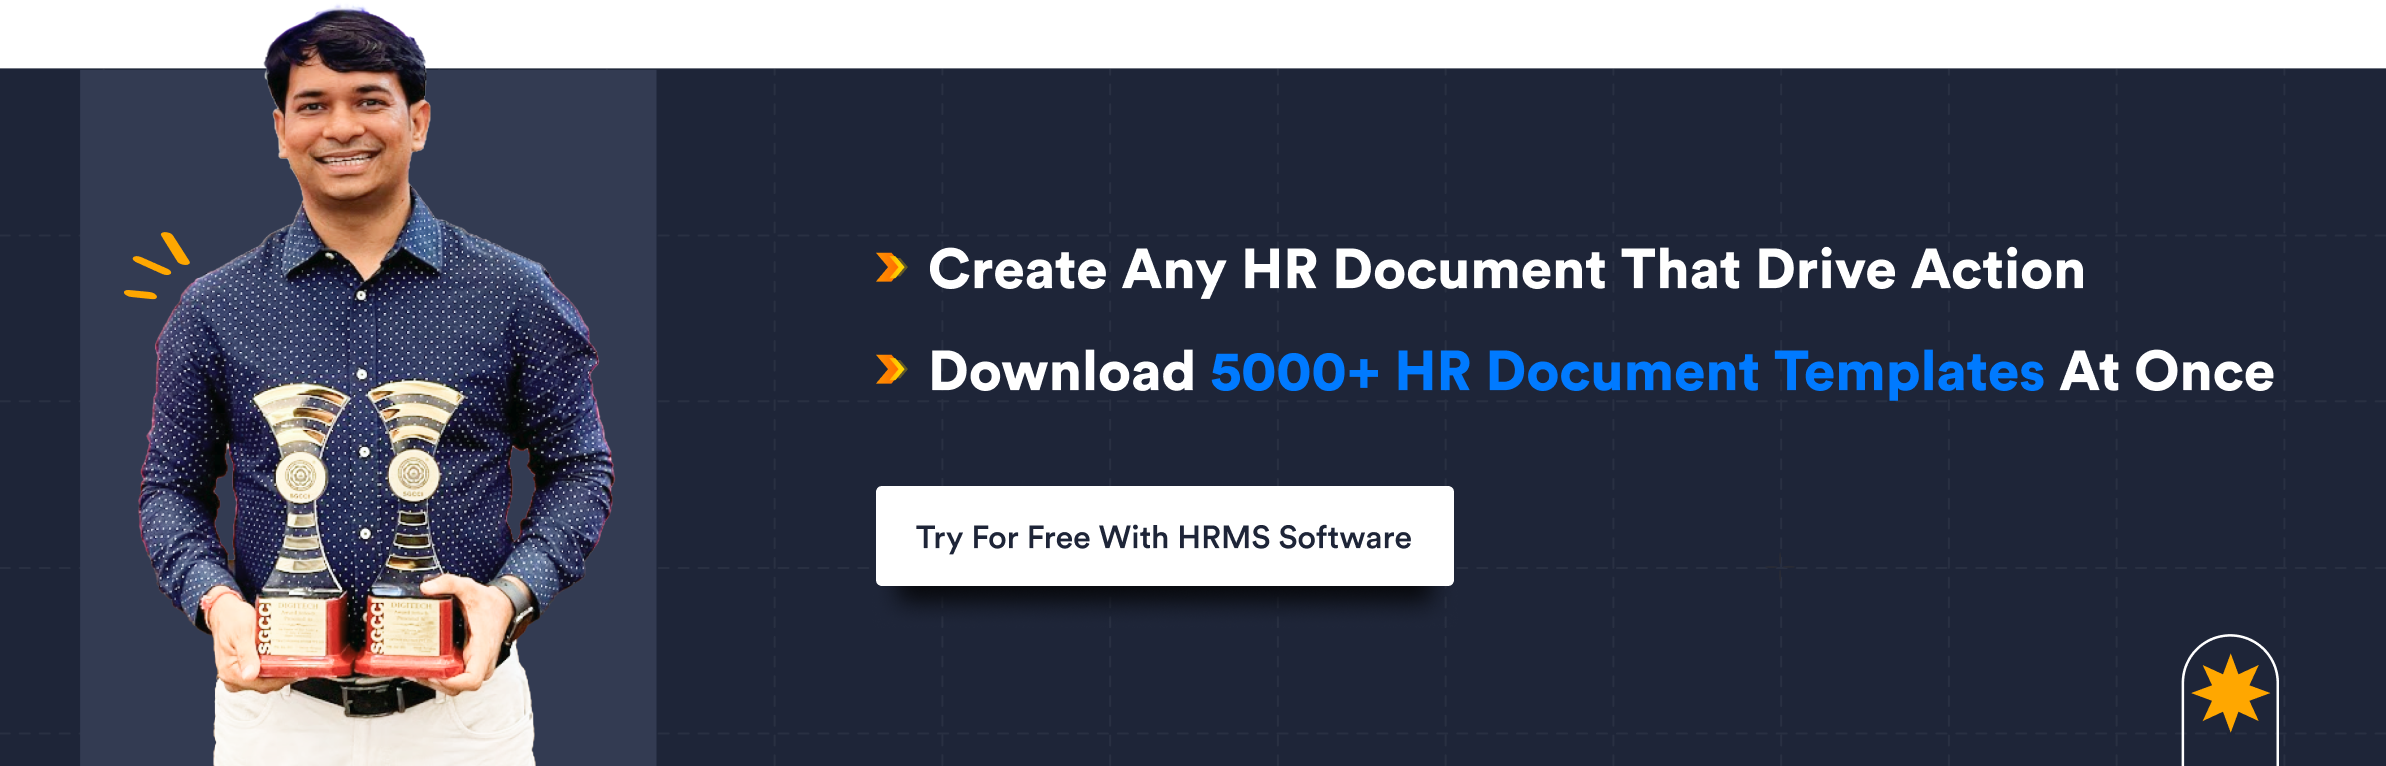 Create Any HR Document That Drive Action 1